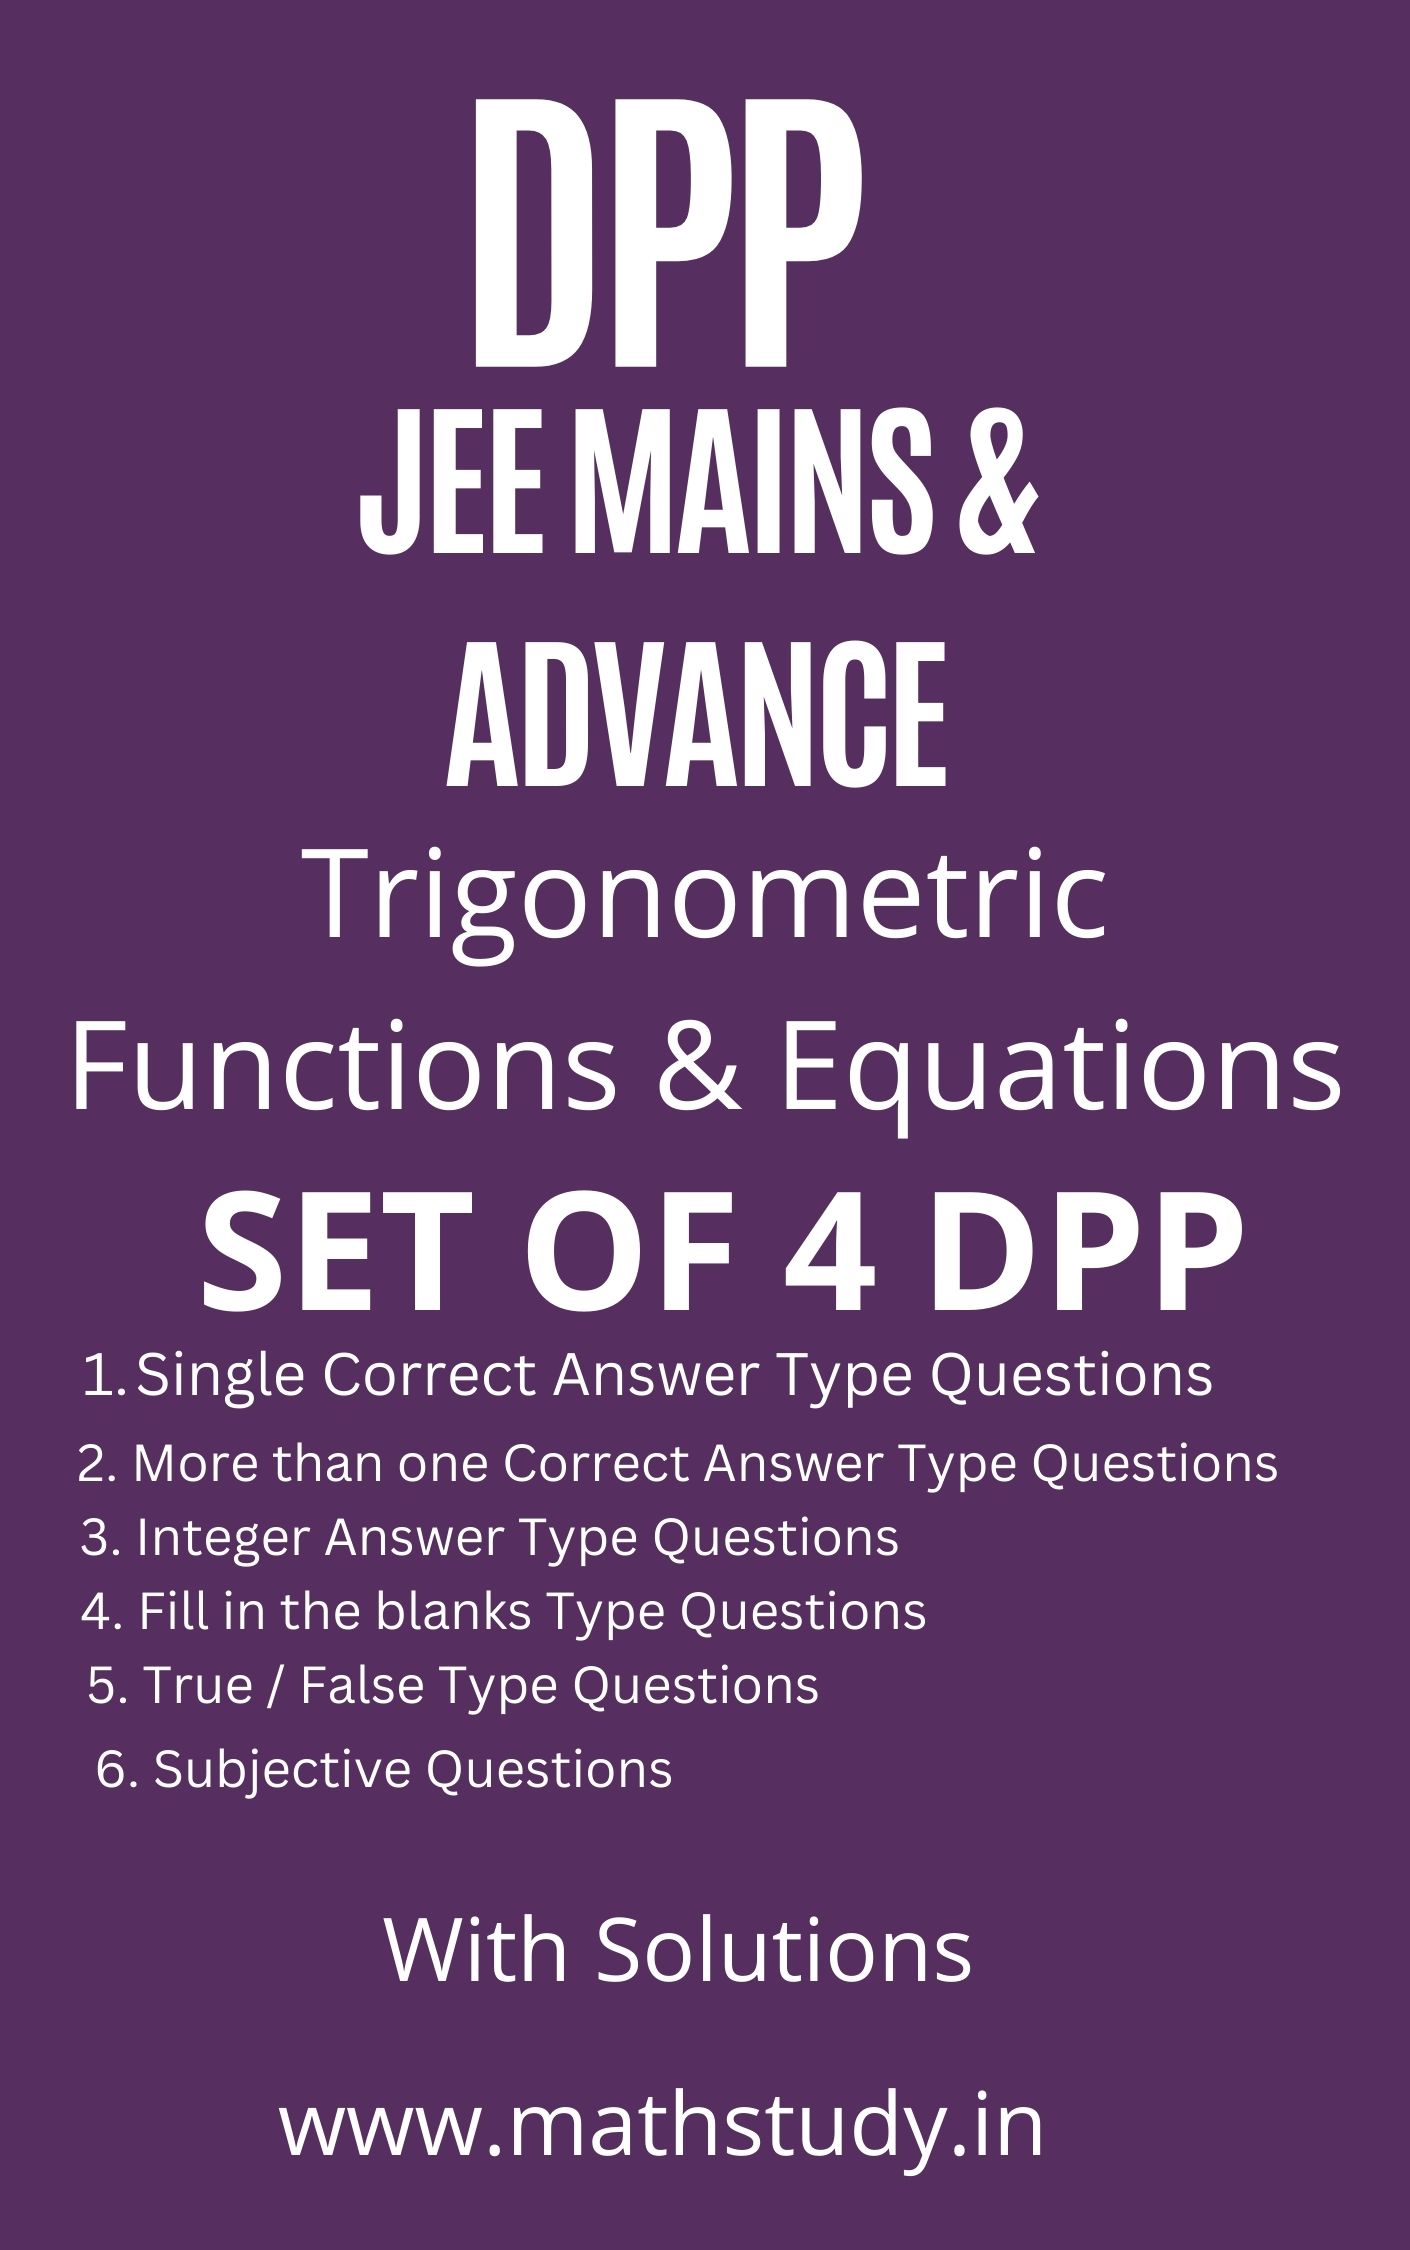 Daily Practice Problems (DPP) for JEE Mains & Advance